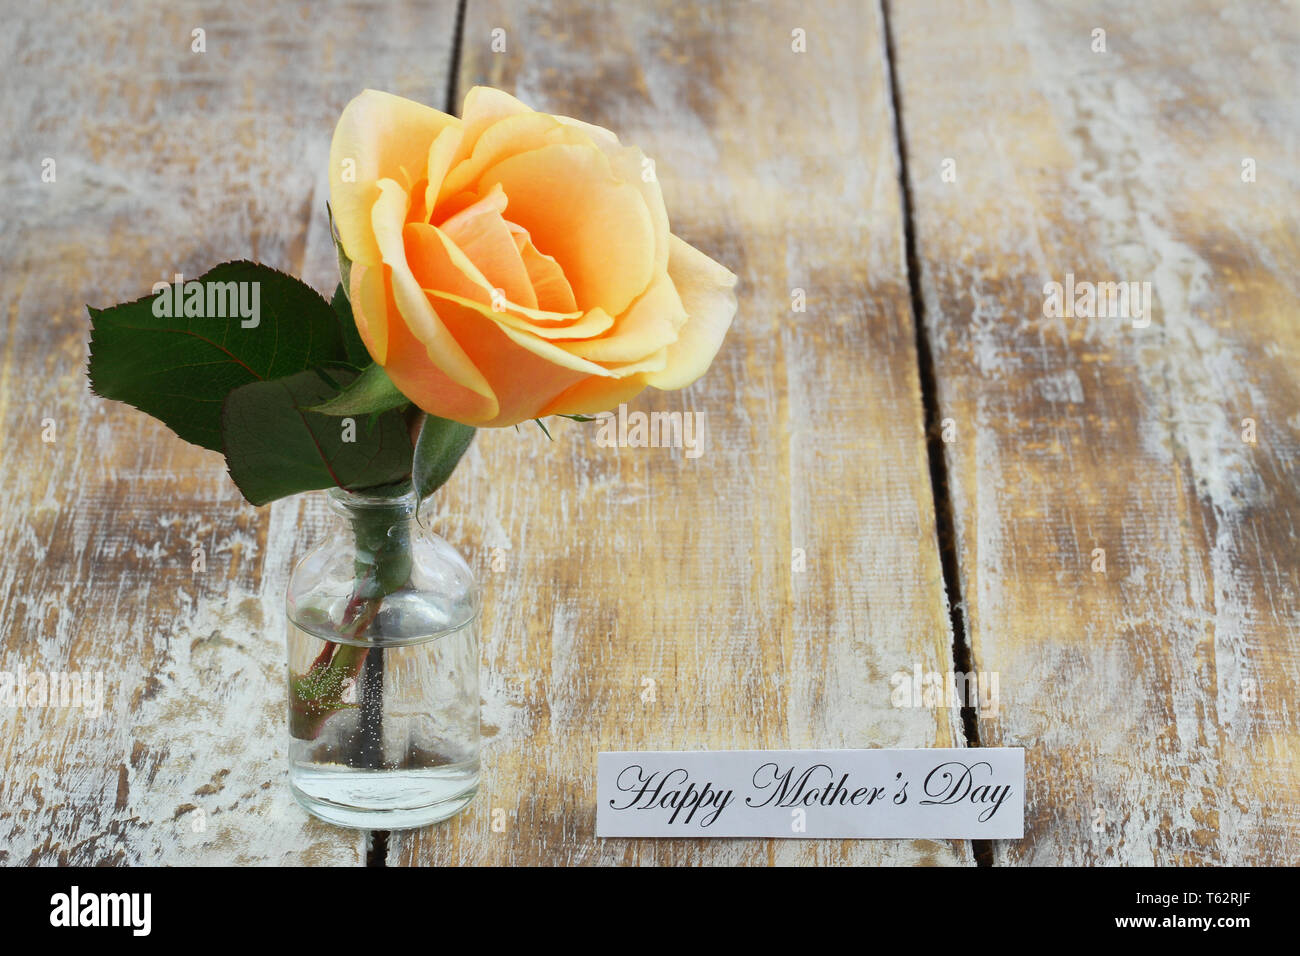 Happy Mothers day card with cream colour rose in transparent glass bottle on rustic wooden surface Stock Photo